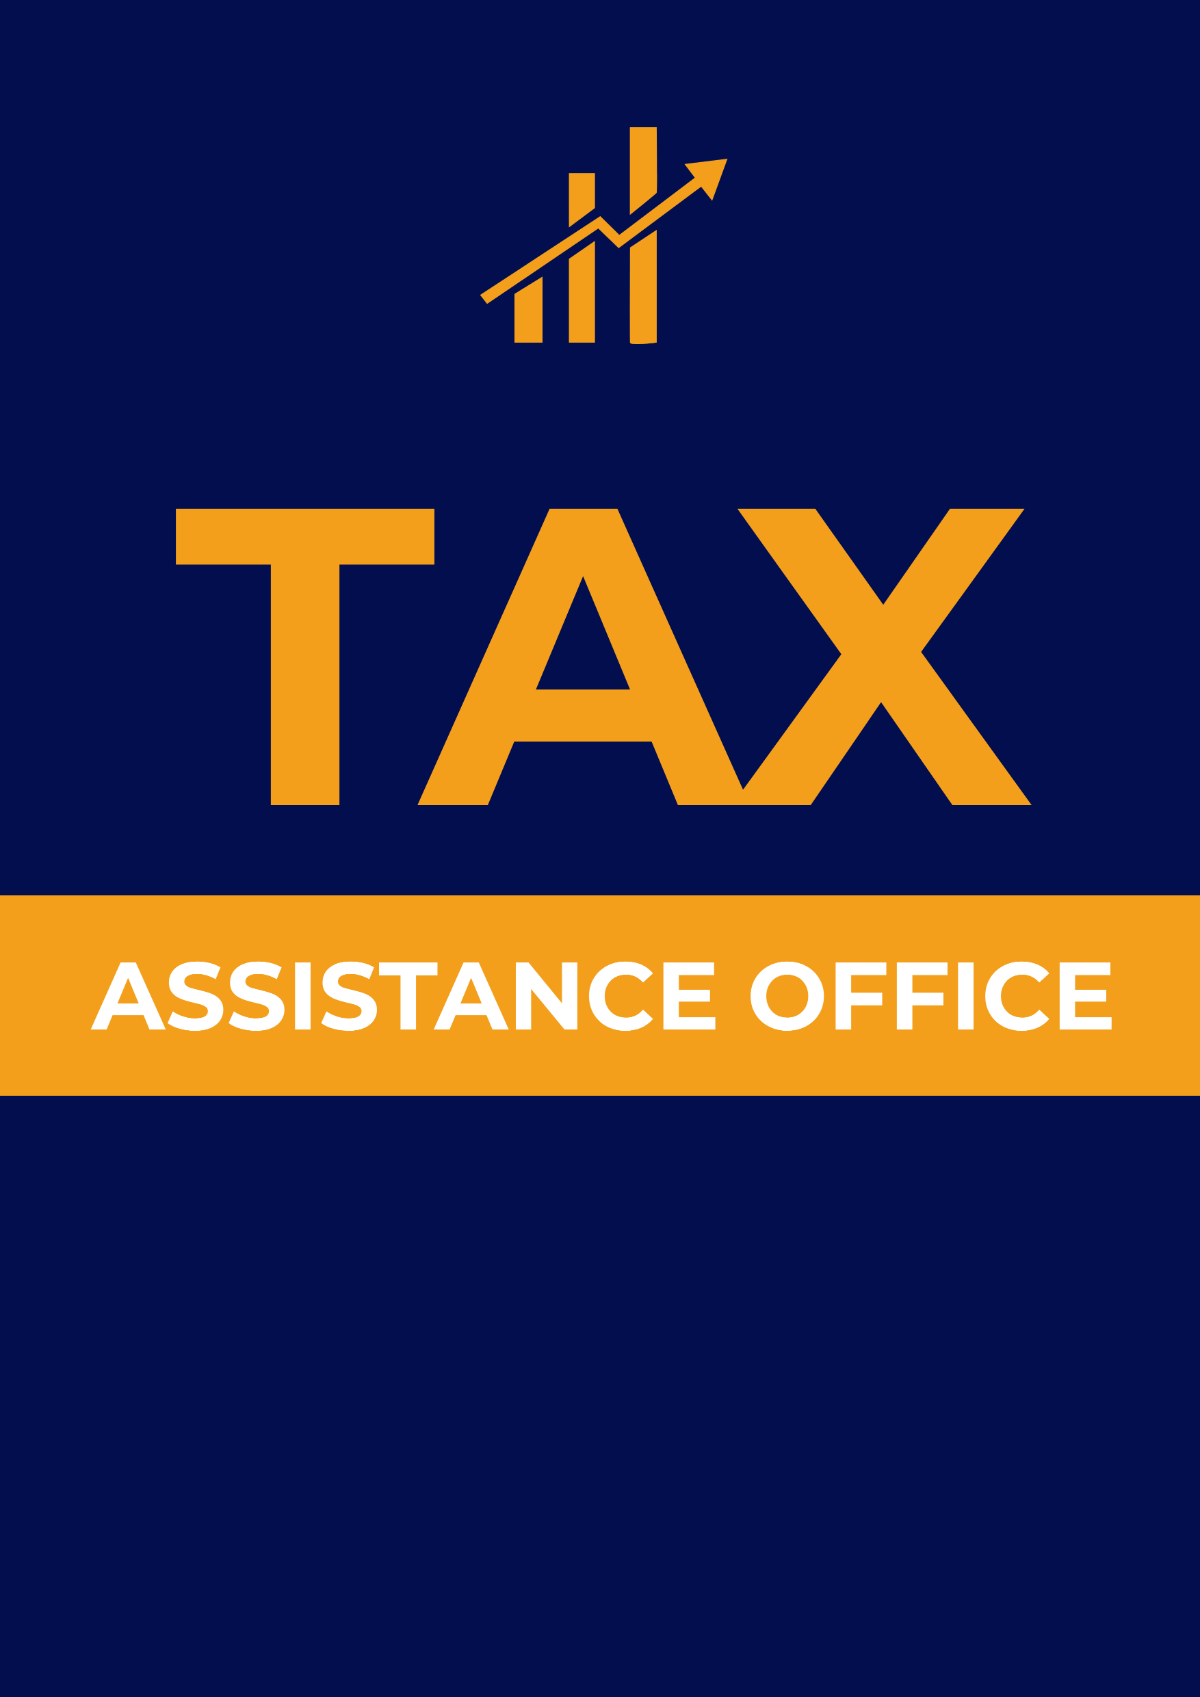 Tax Assistance Office Signage